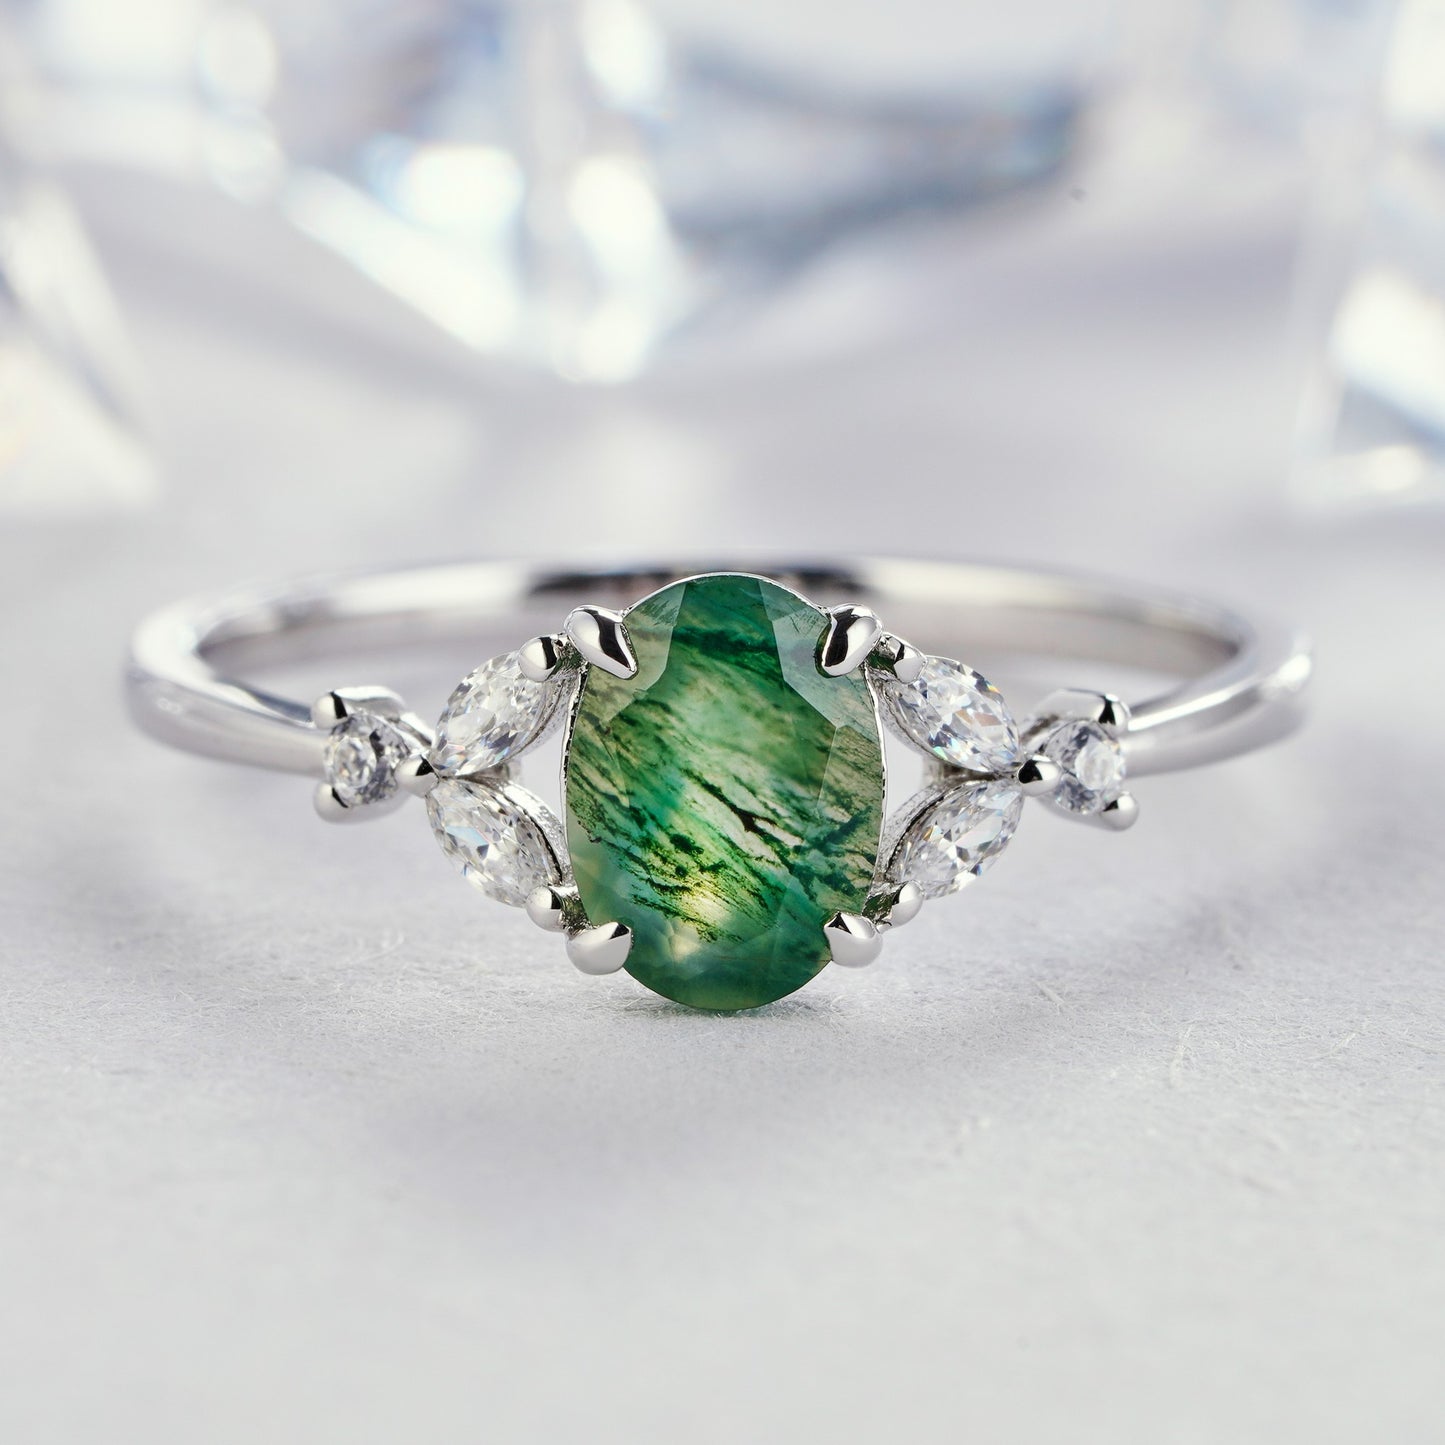 0.8ct Oval Cut Moss Agate Engagement Diamond Ring in14K/18K Gold - ShainJewelry